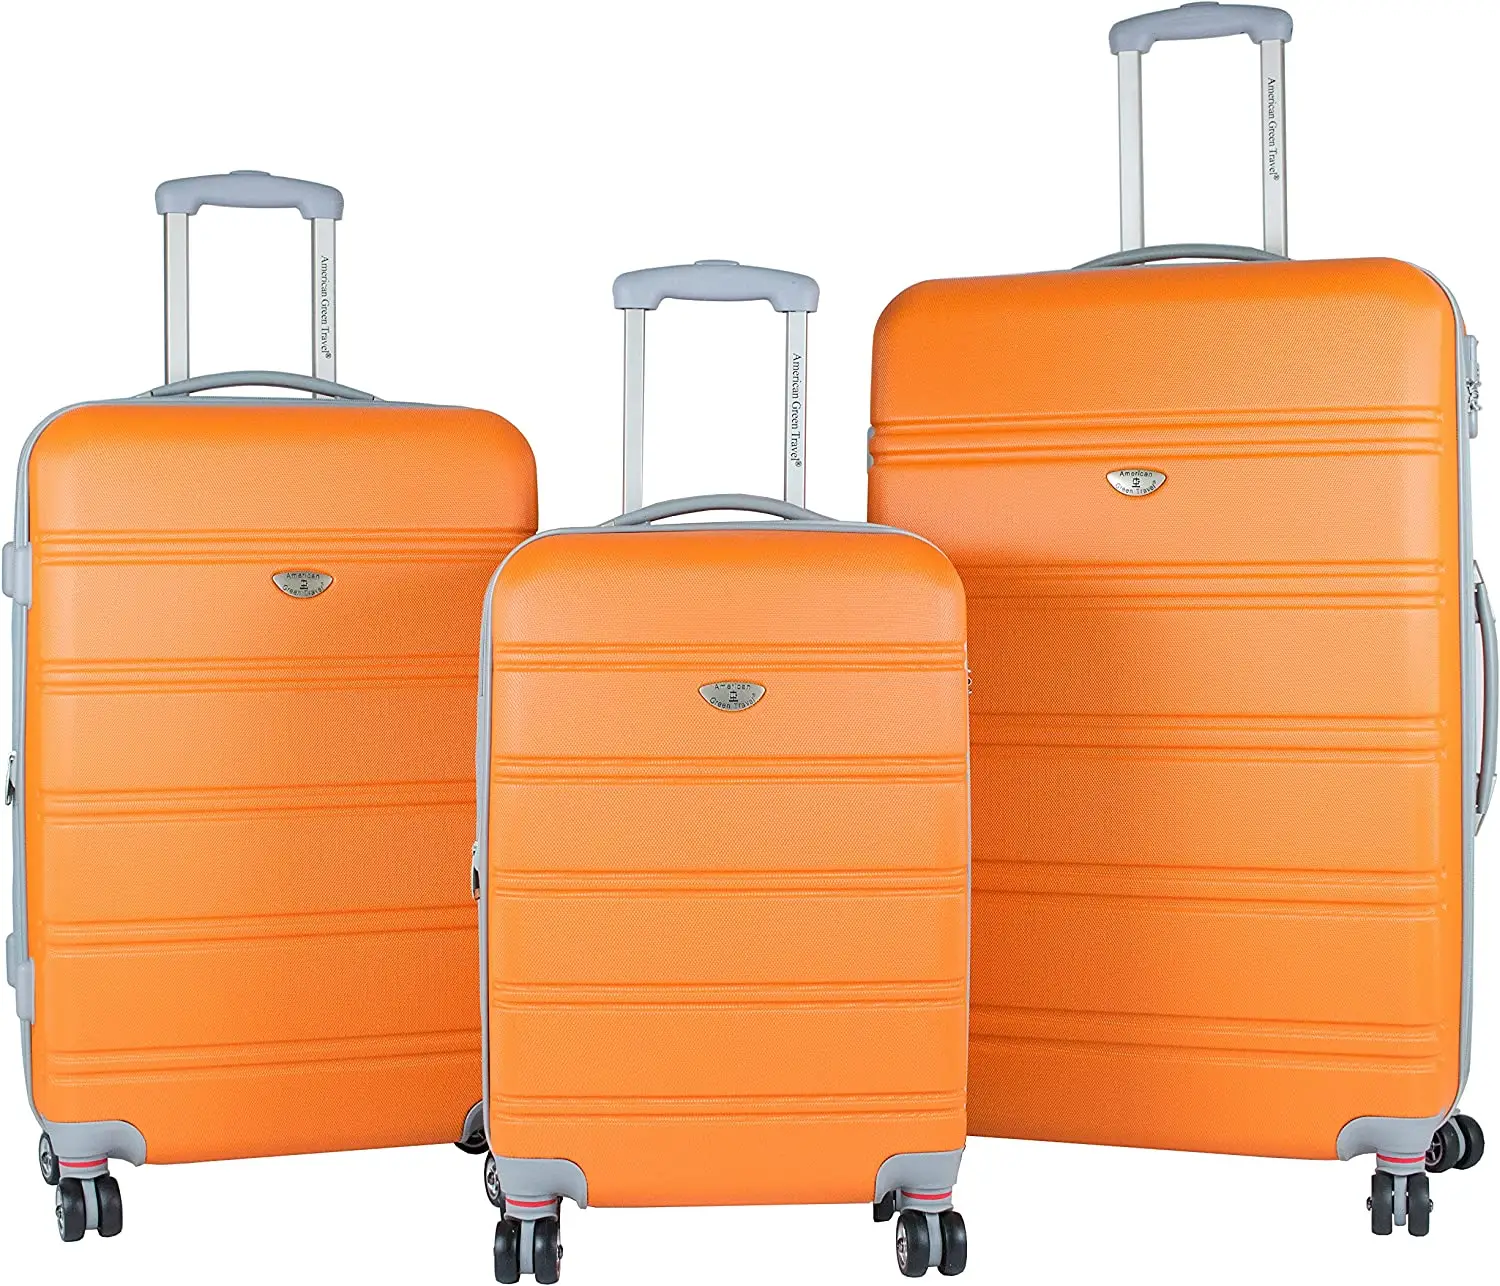 You are currently viewing American Green Travel Luggage Reviewed – Is It Worth The Investment?